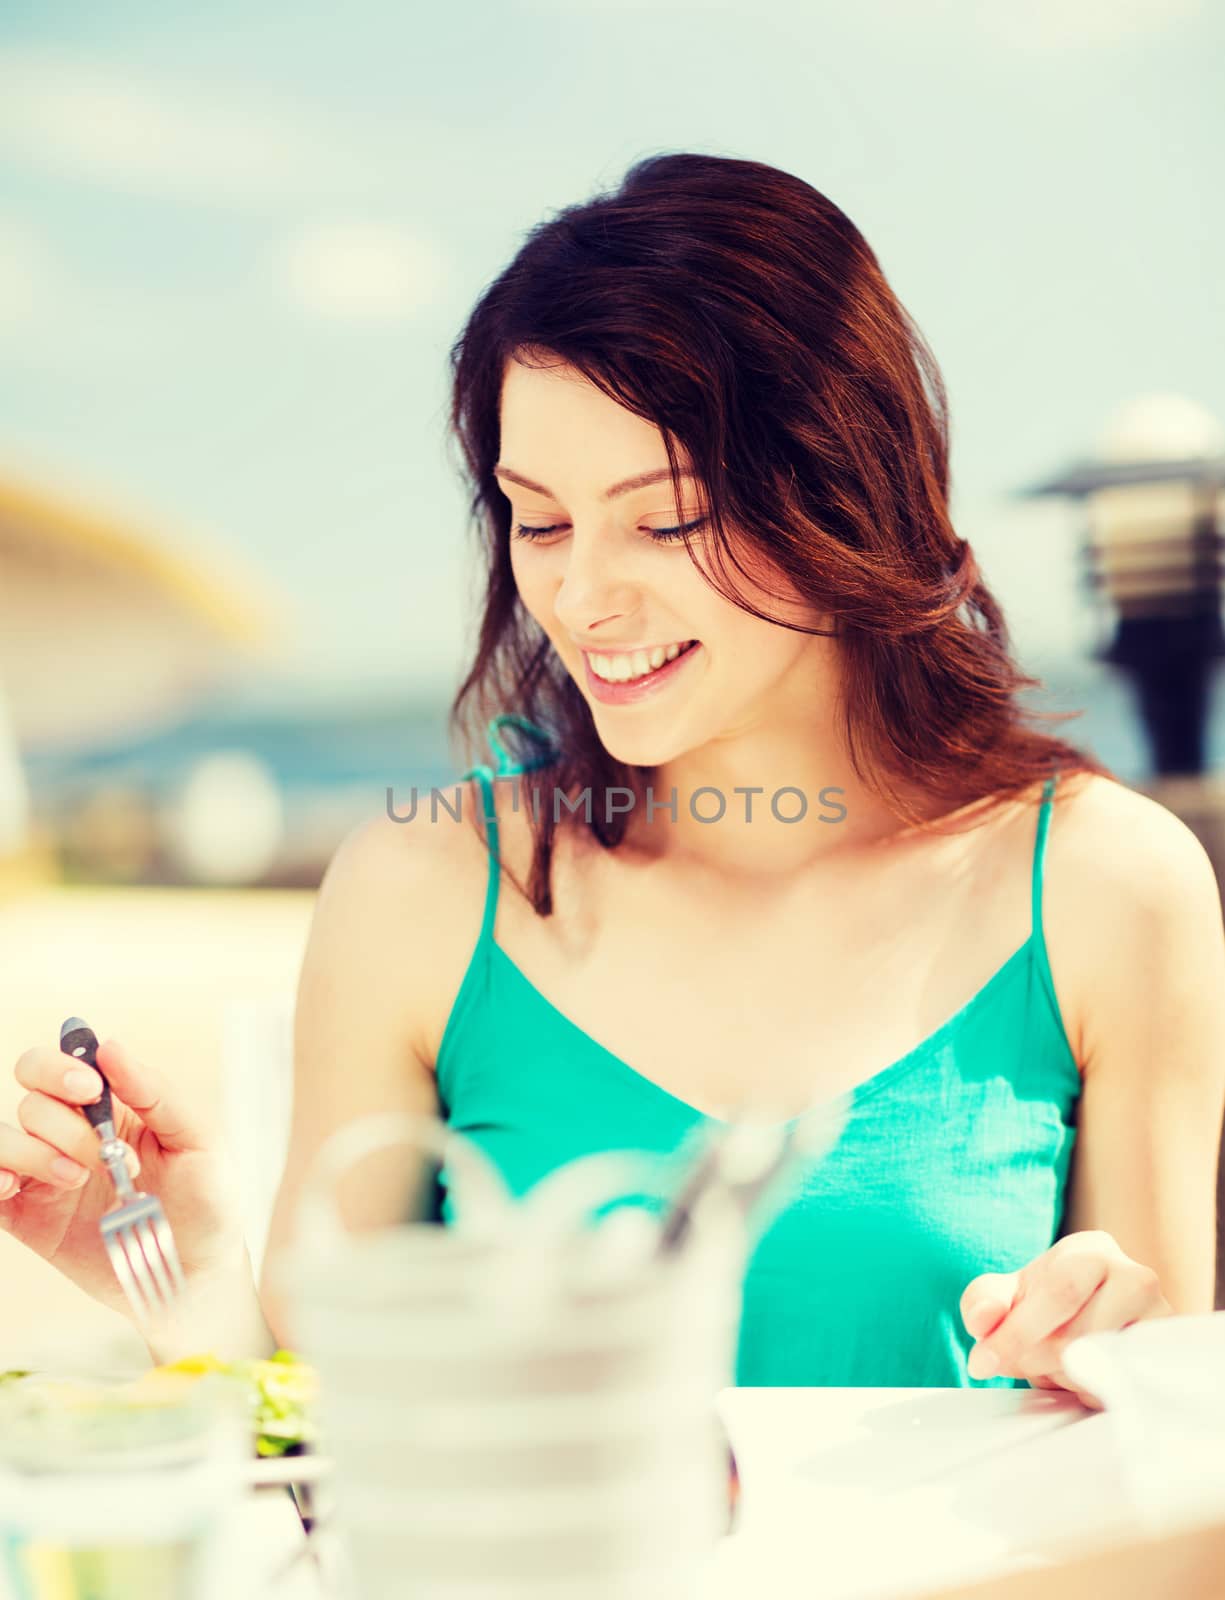 summer holidays and vacation - girl eating in cafe on the beach